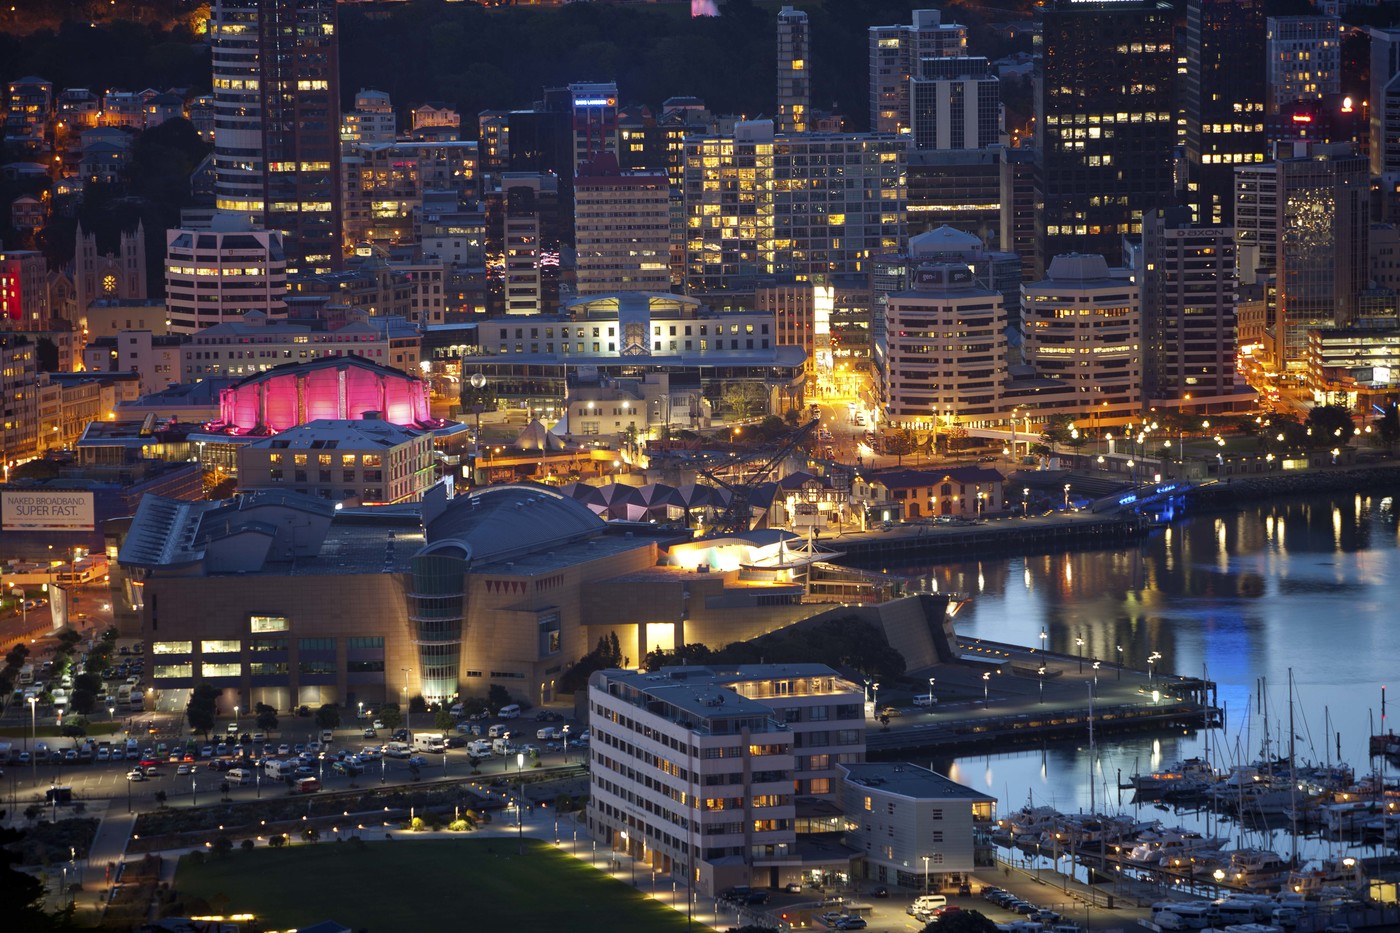 Wellington will be the pinkest city in New Zealand!